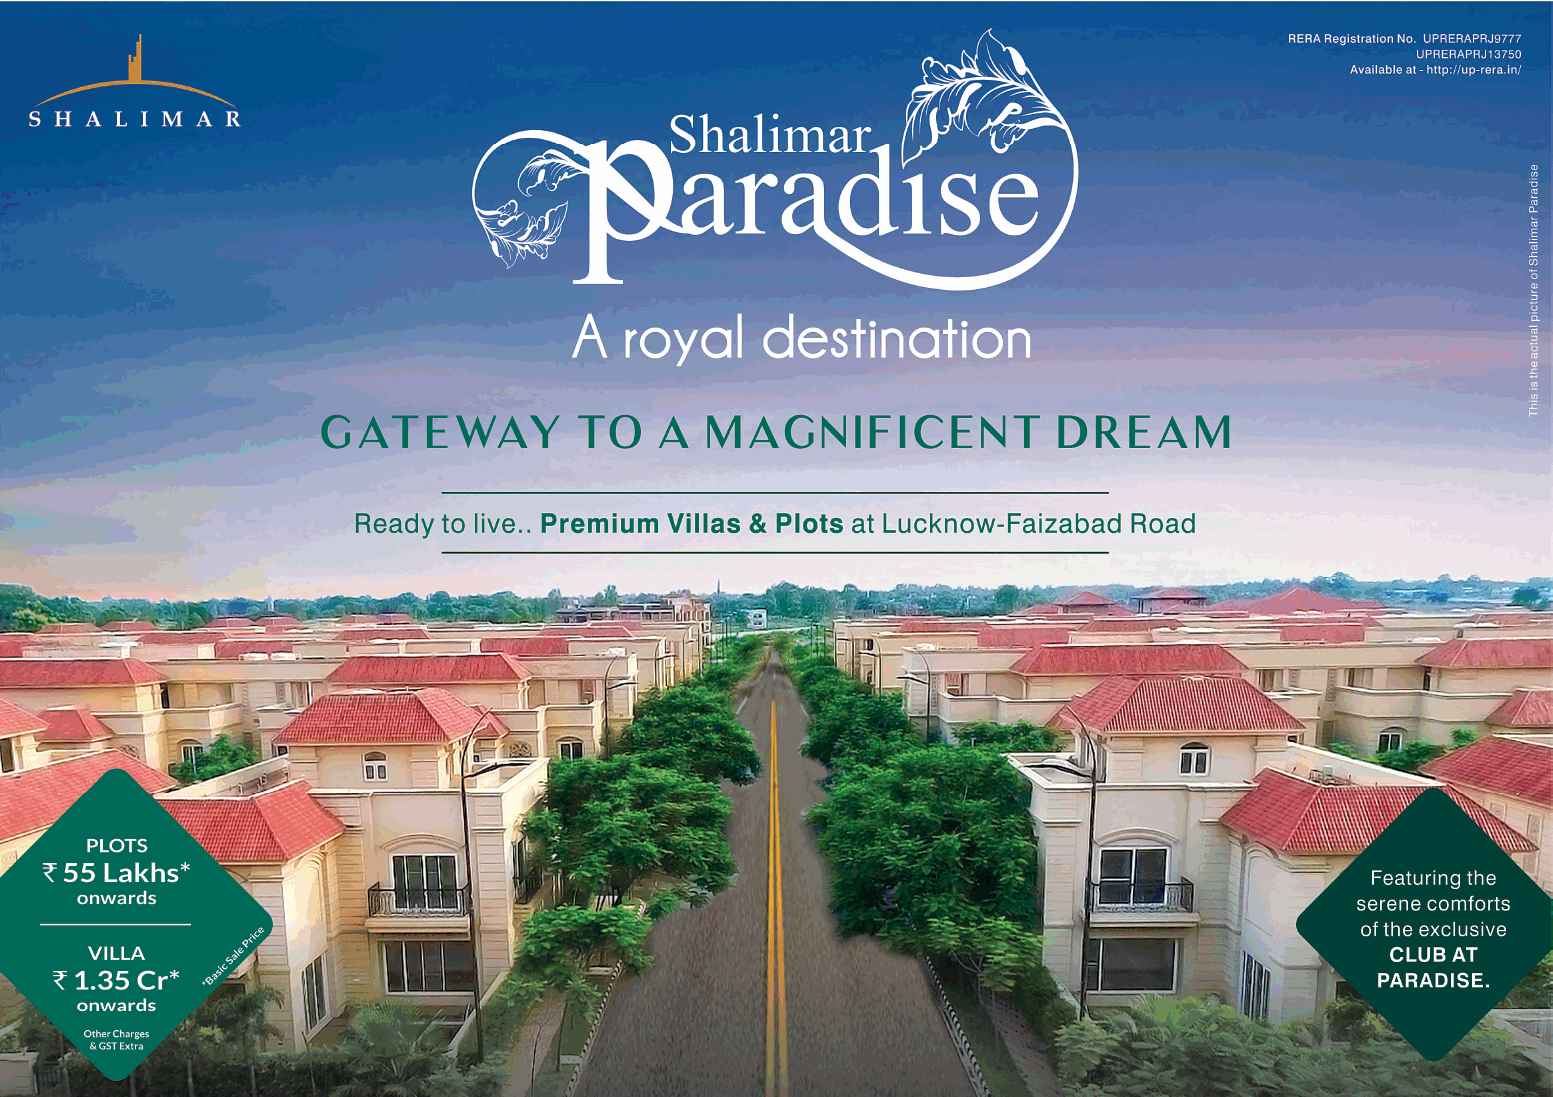 Book ready to live premium villas & plots at Shalimar Paradise in Lucknow Update